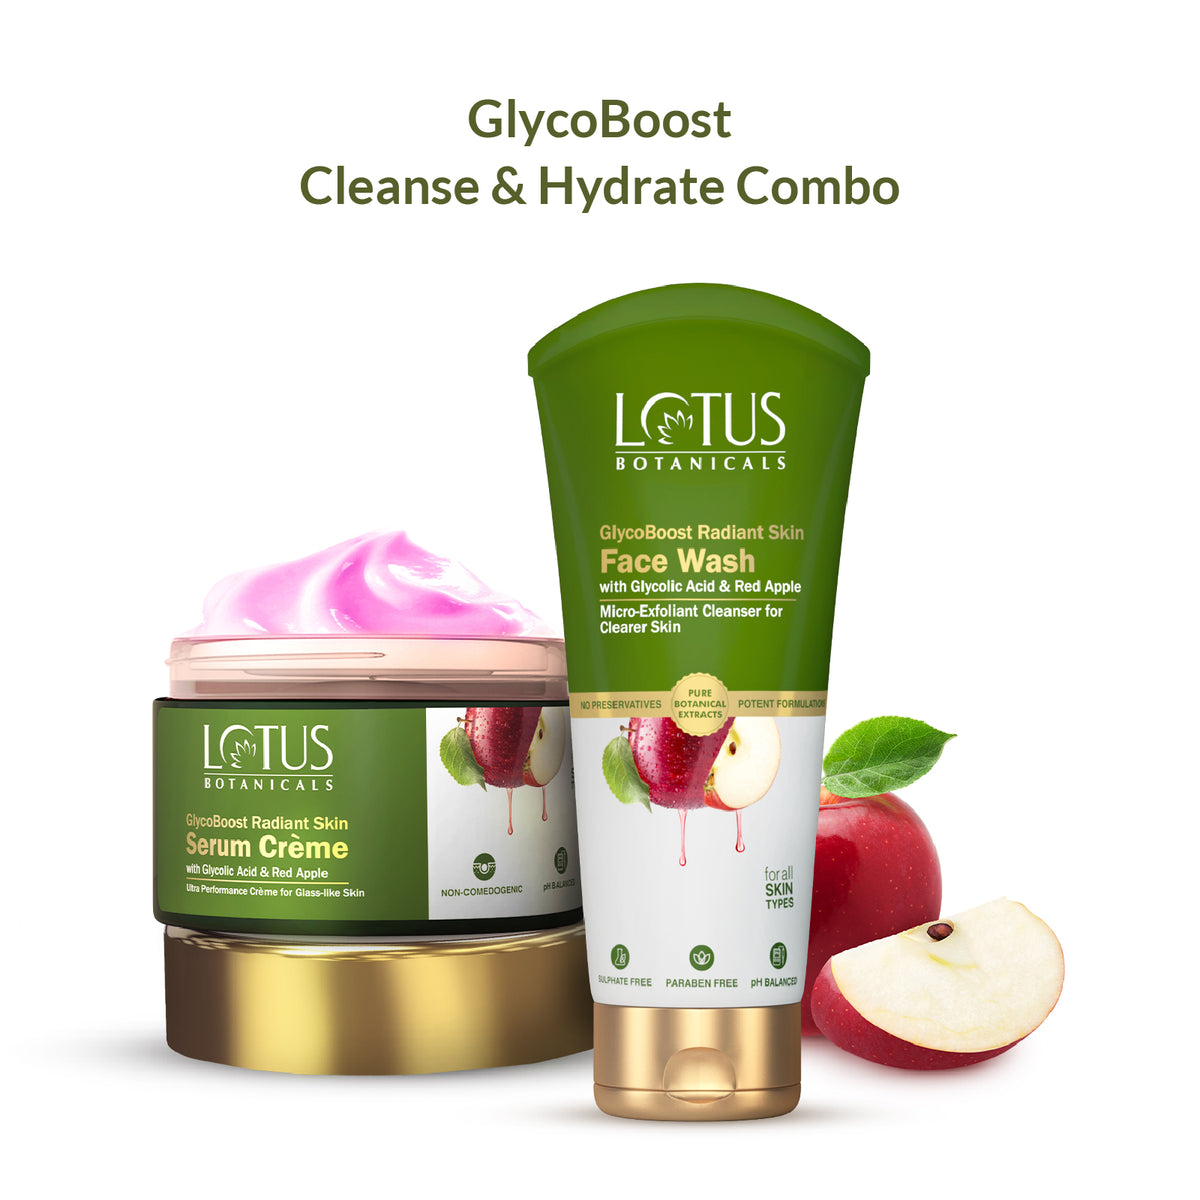 Lotus Botanicals GlycoBoost Cleanse & Hydrate Combo